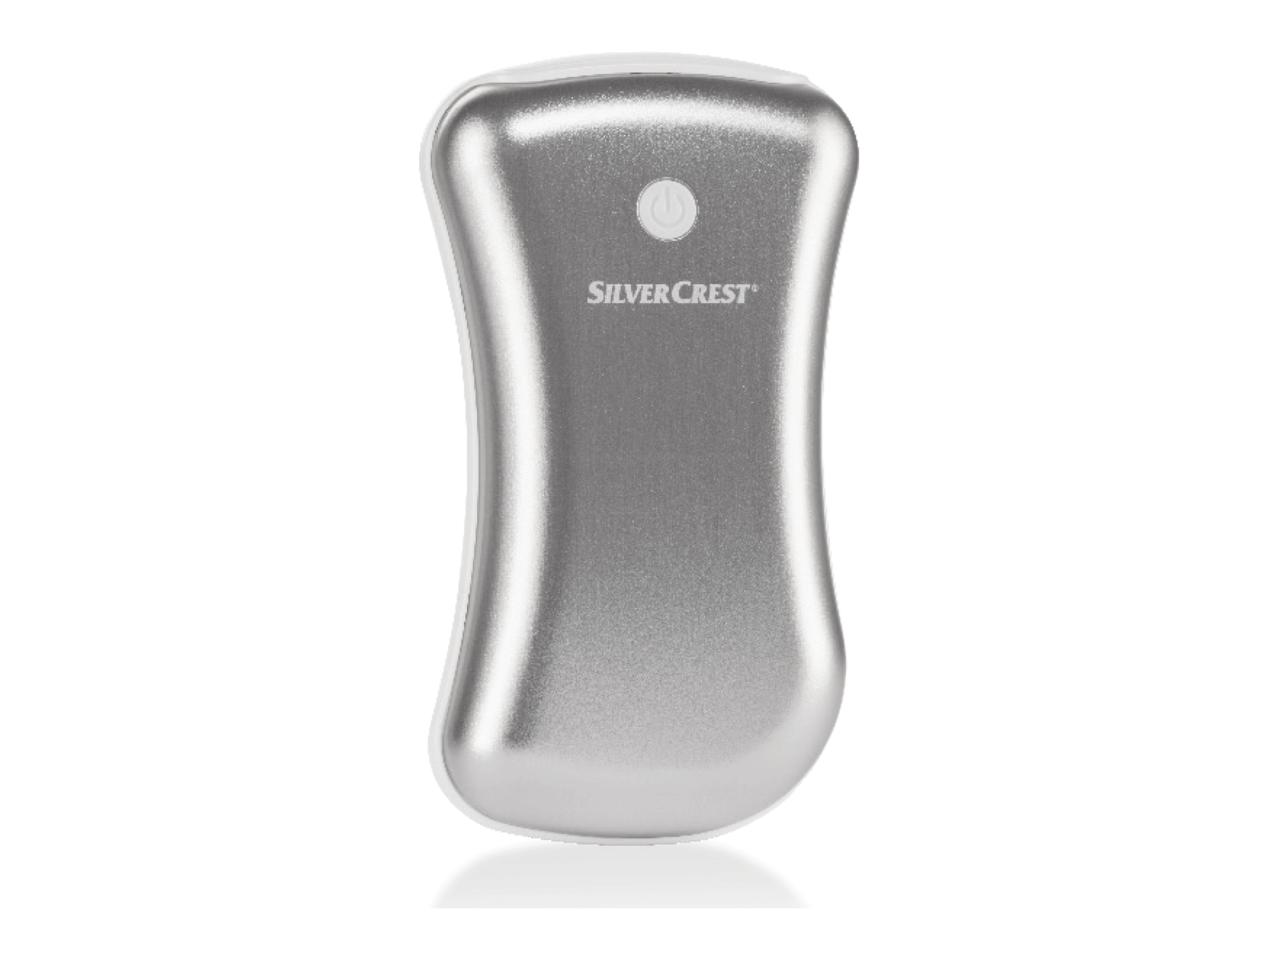 SILVERCREST 2-In-1 Power Bank with Hand Warming Function